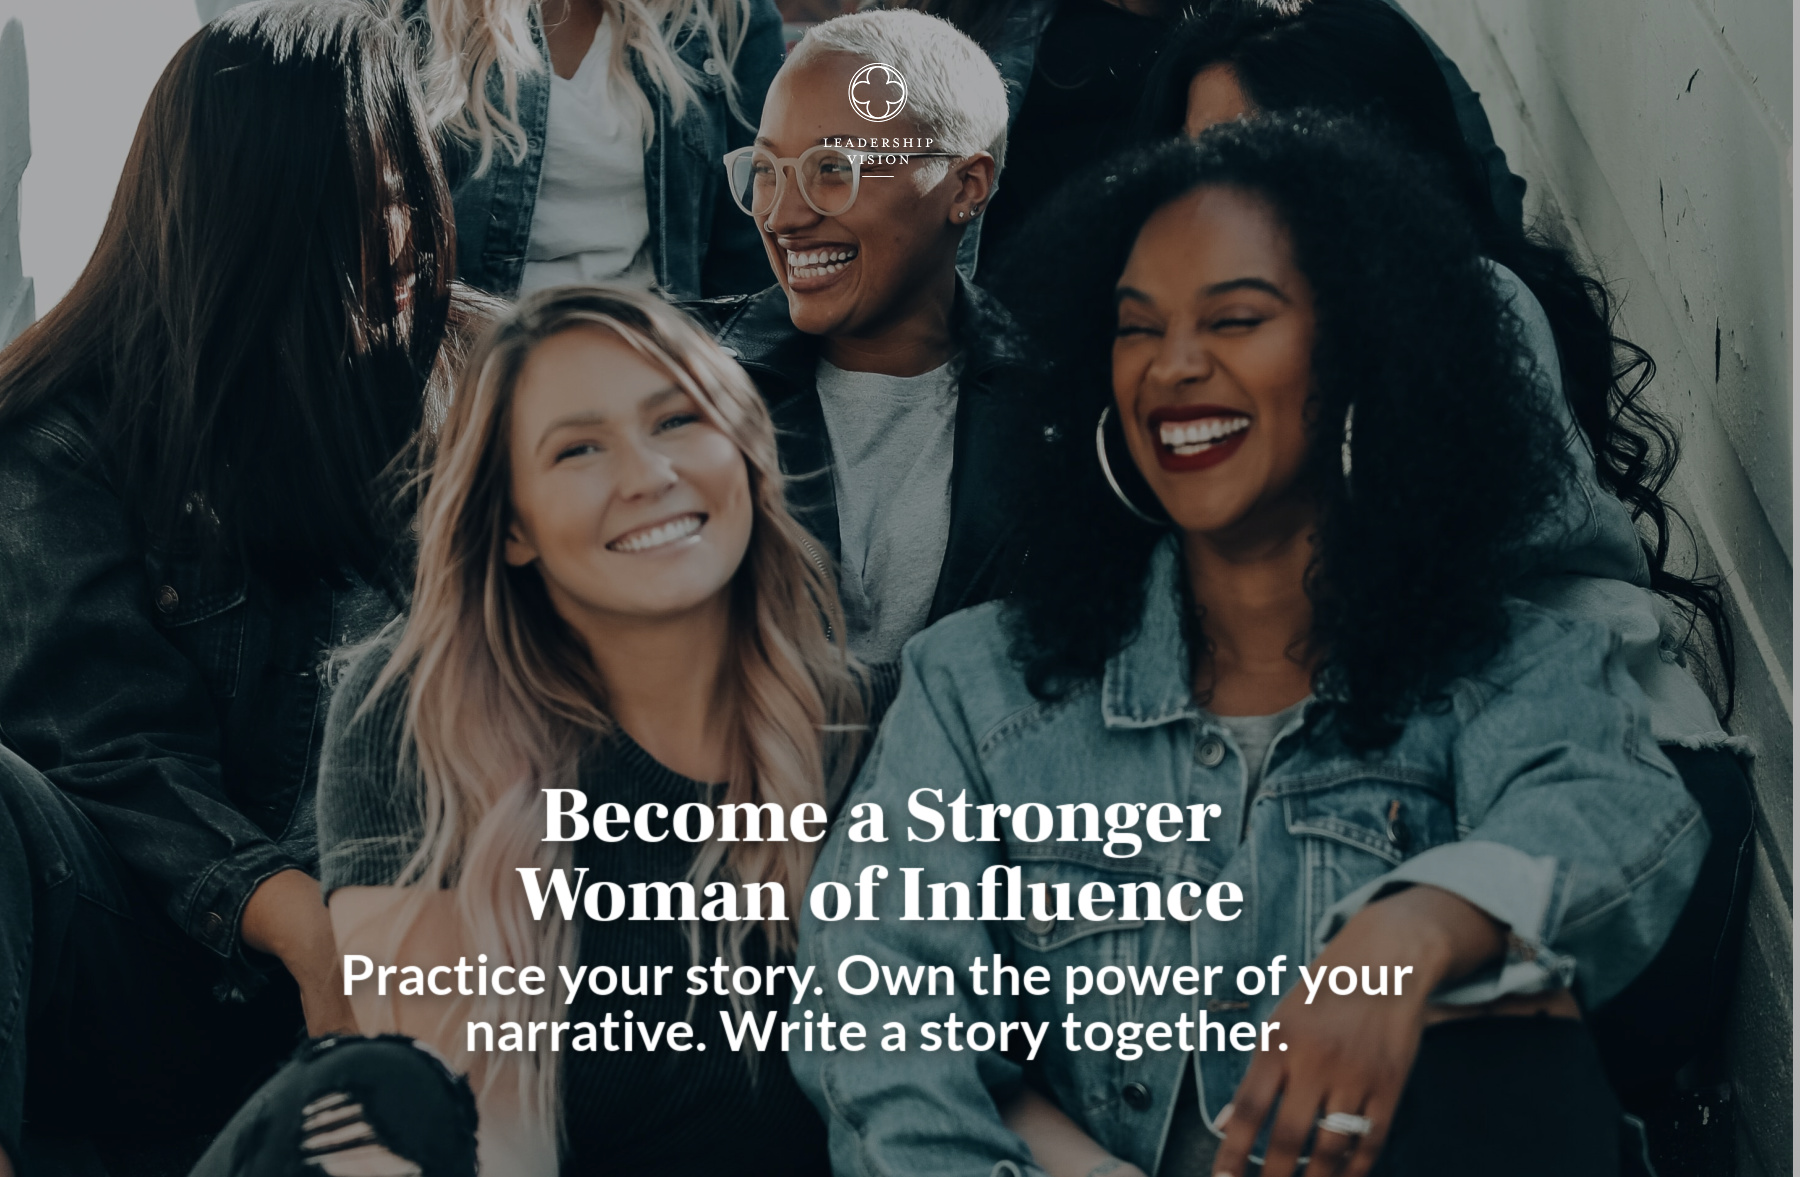 Become a Stronger Woman of Influence